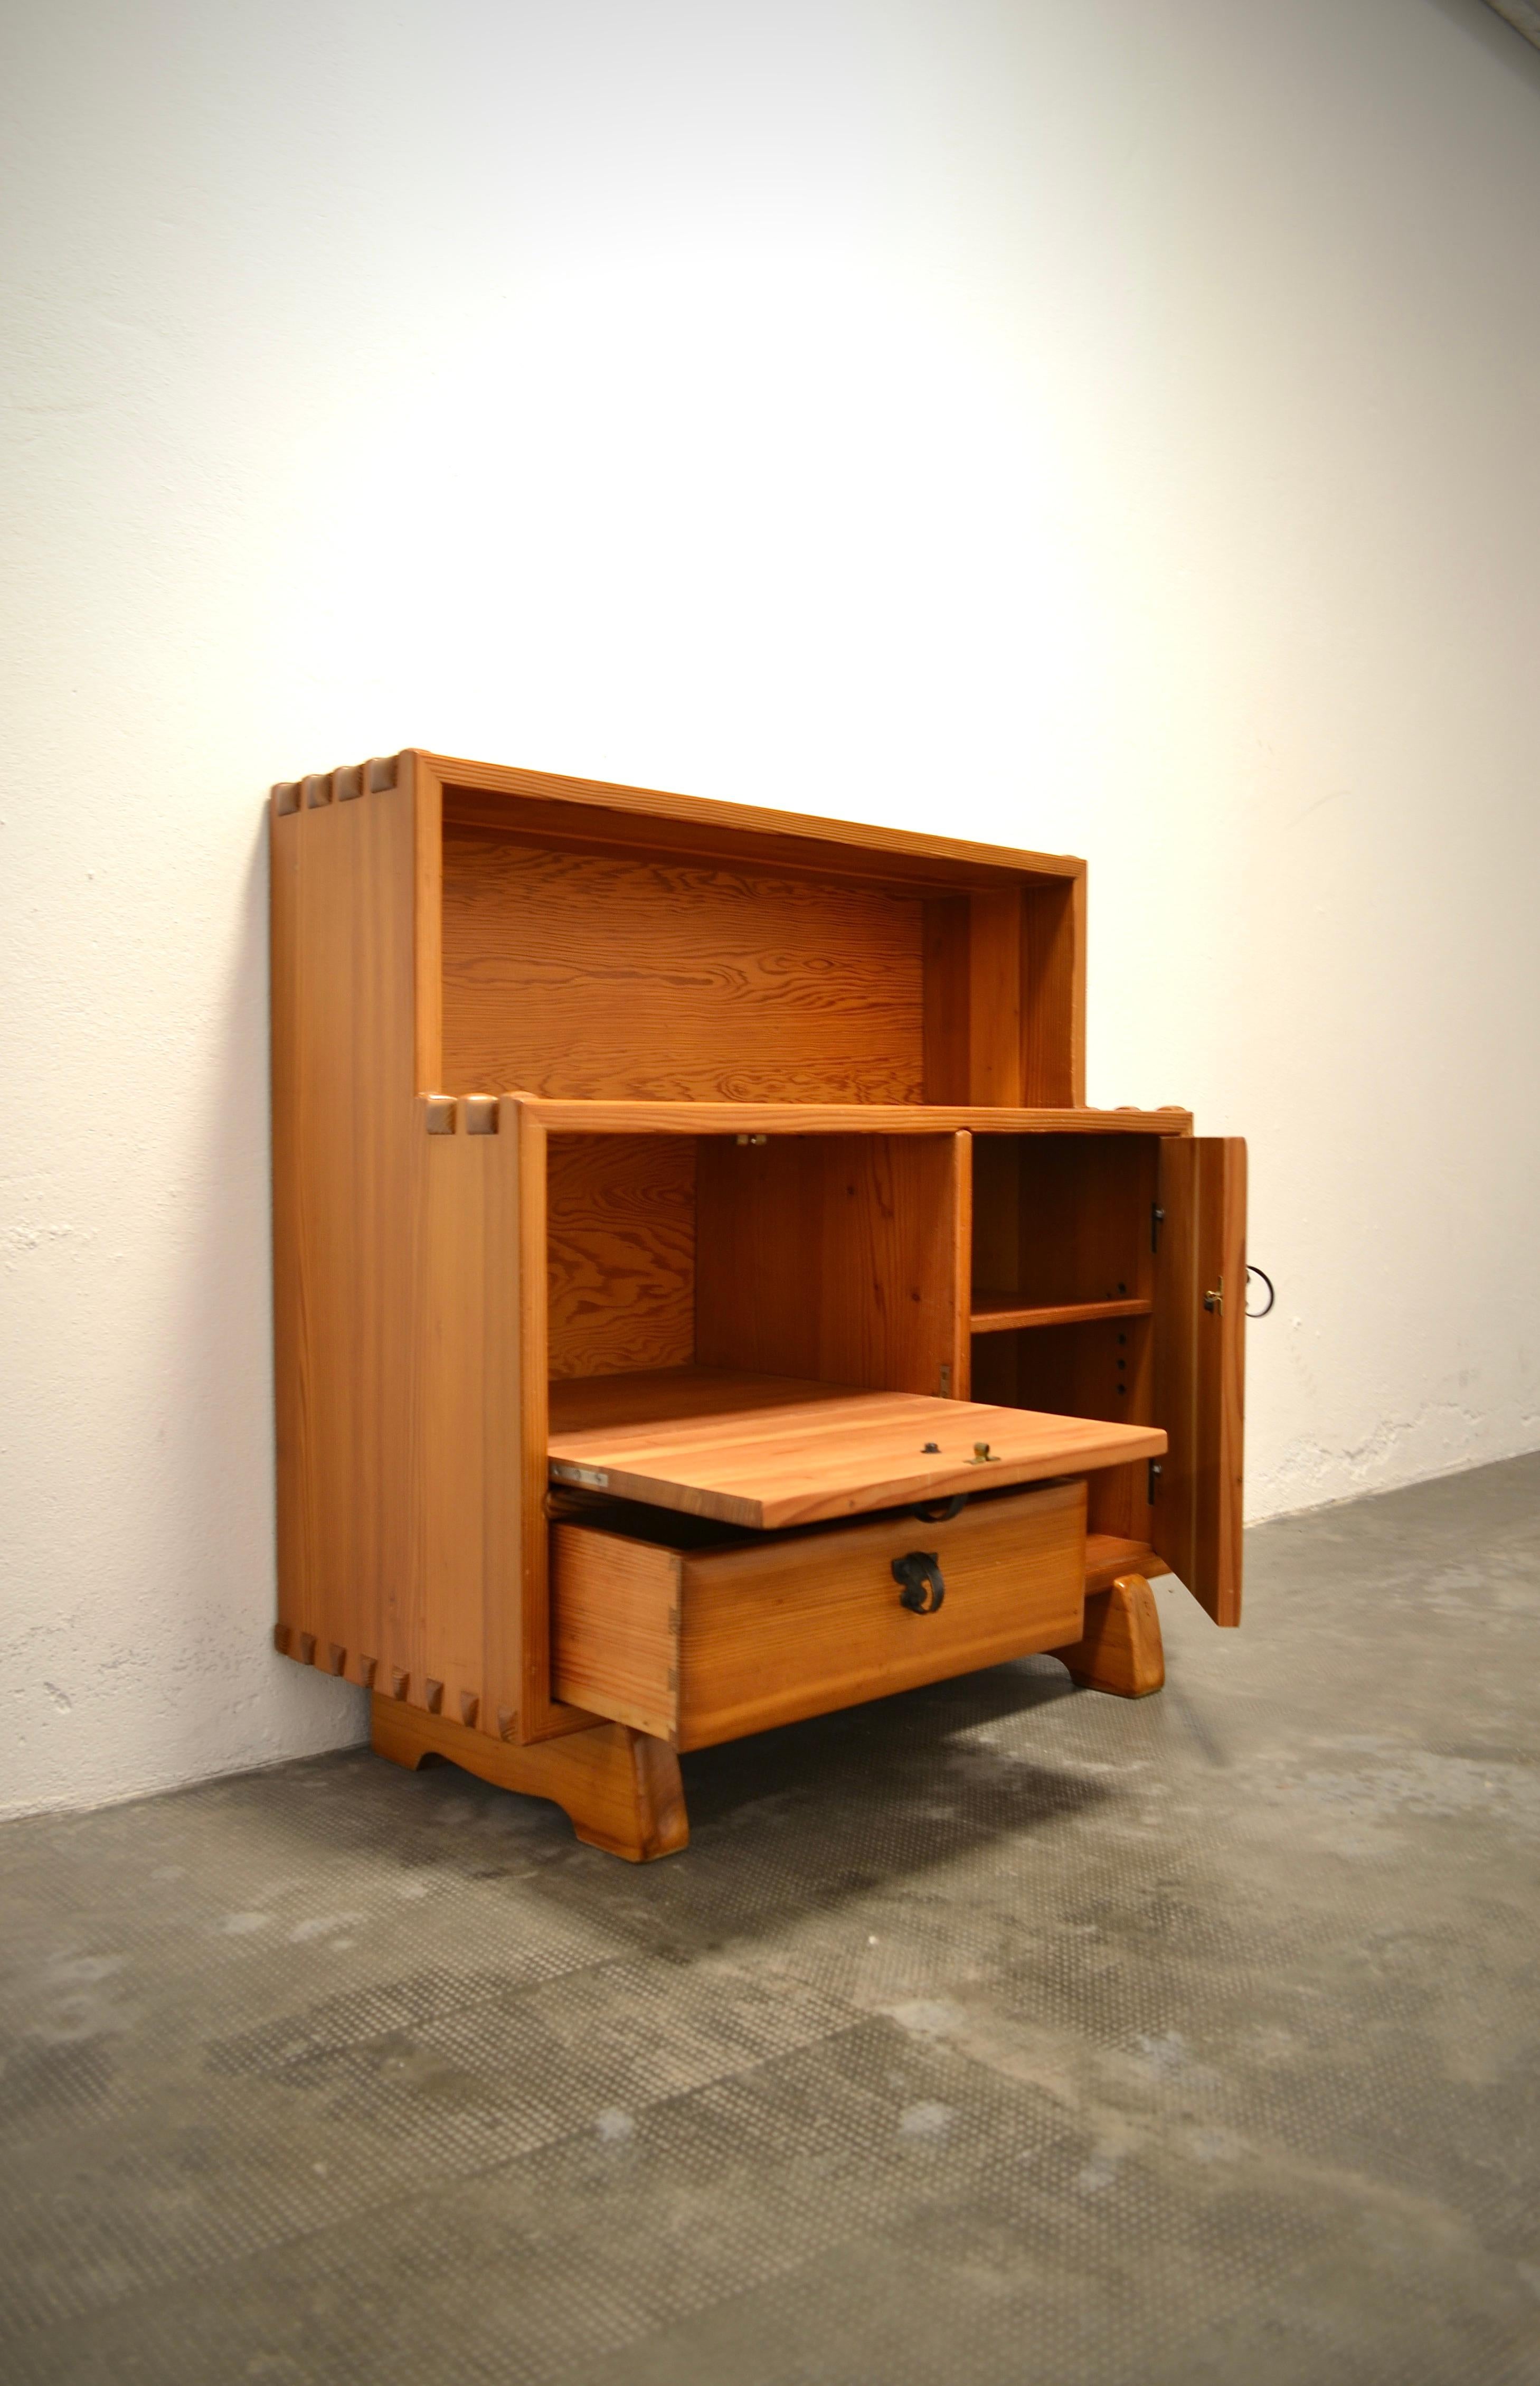 Wrought Iron Brutalist Chest of Drawers in Solid Pine, Sproll, Switzerland, 1970s